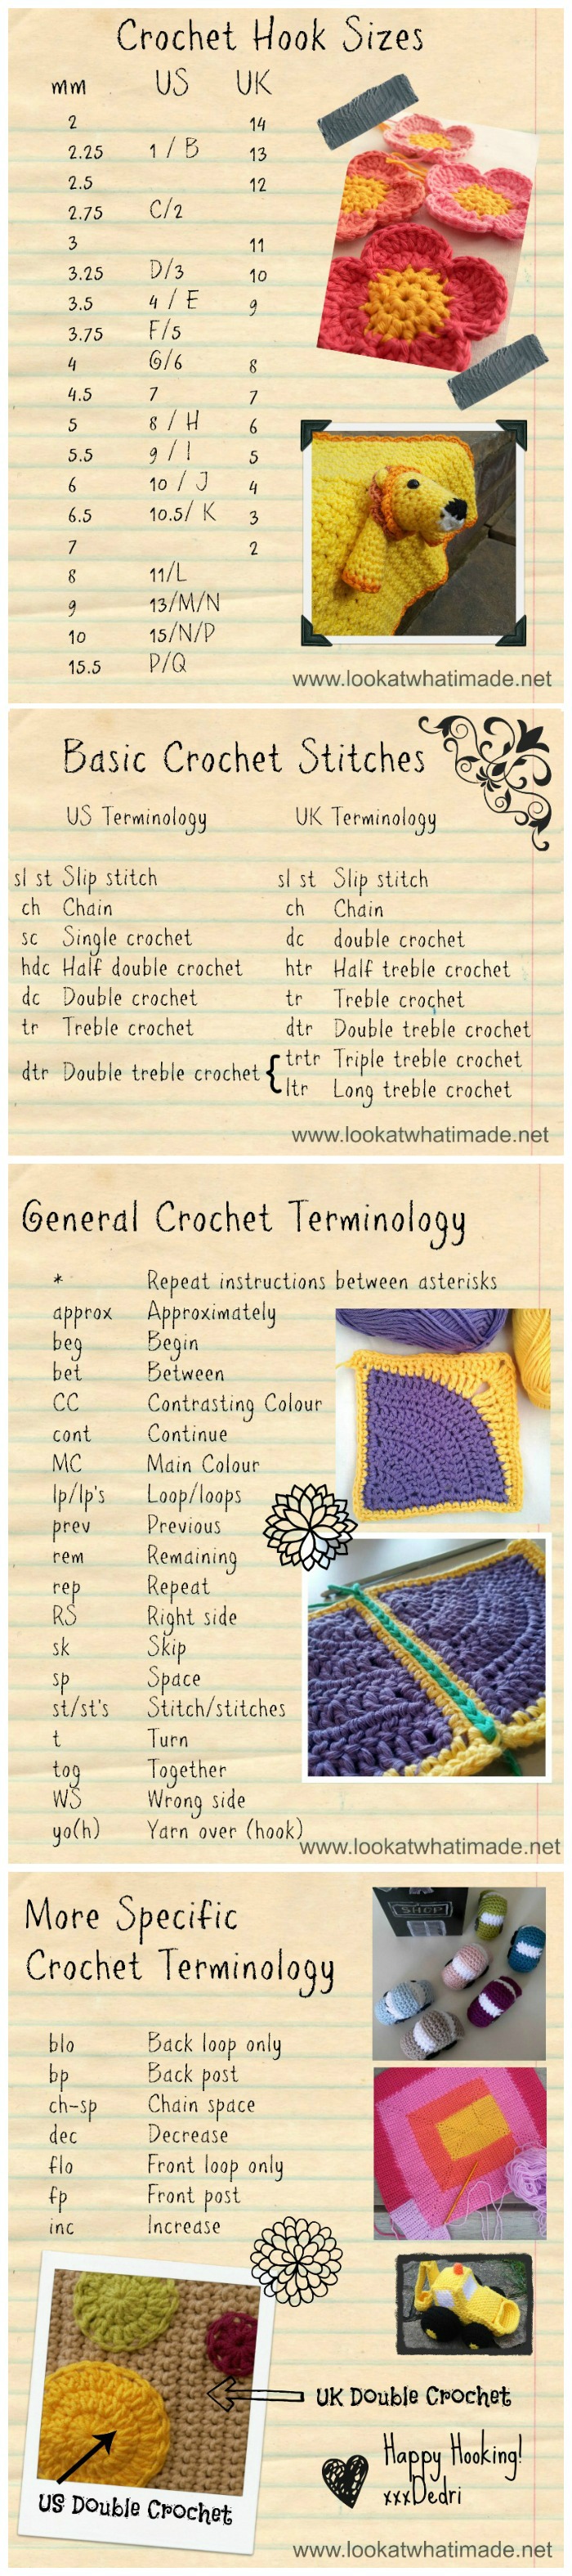 Crochet Hook Sizes and Abbreviations (US and UK Terminology)